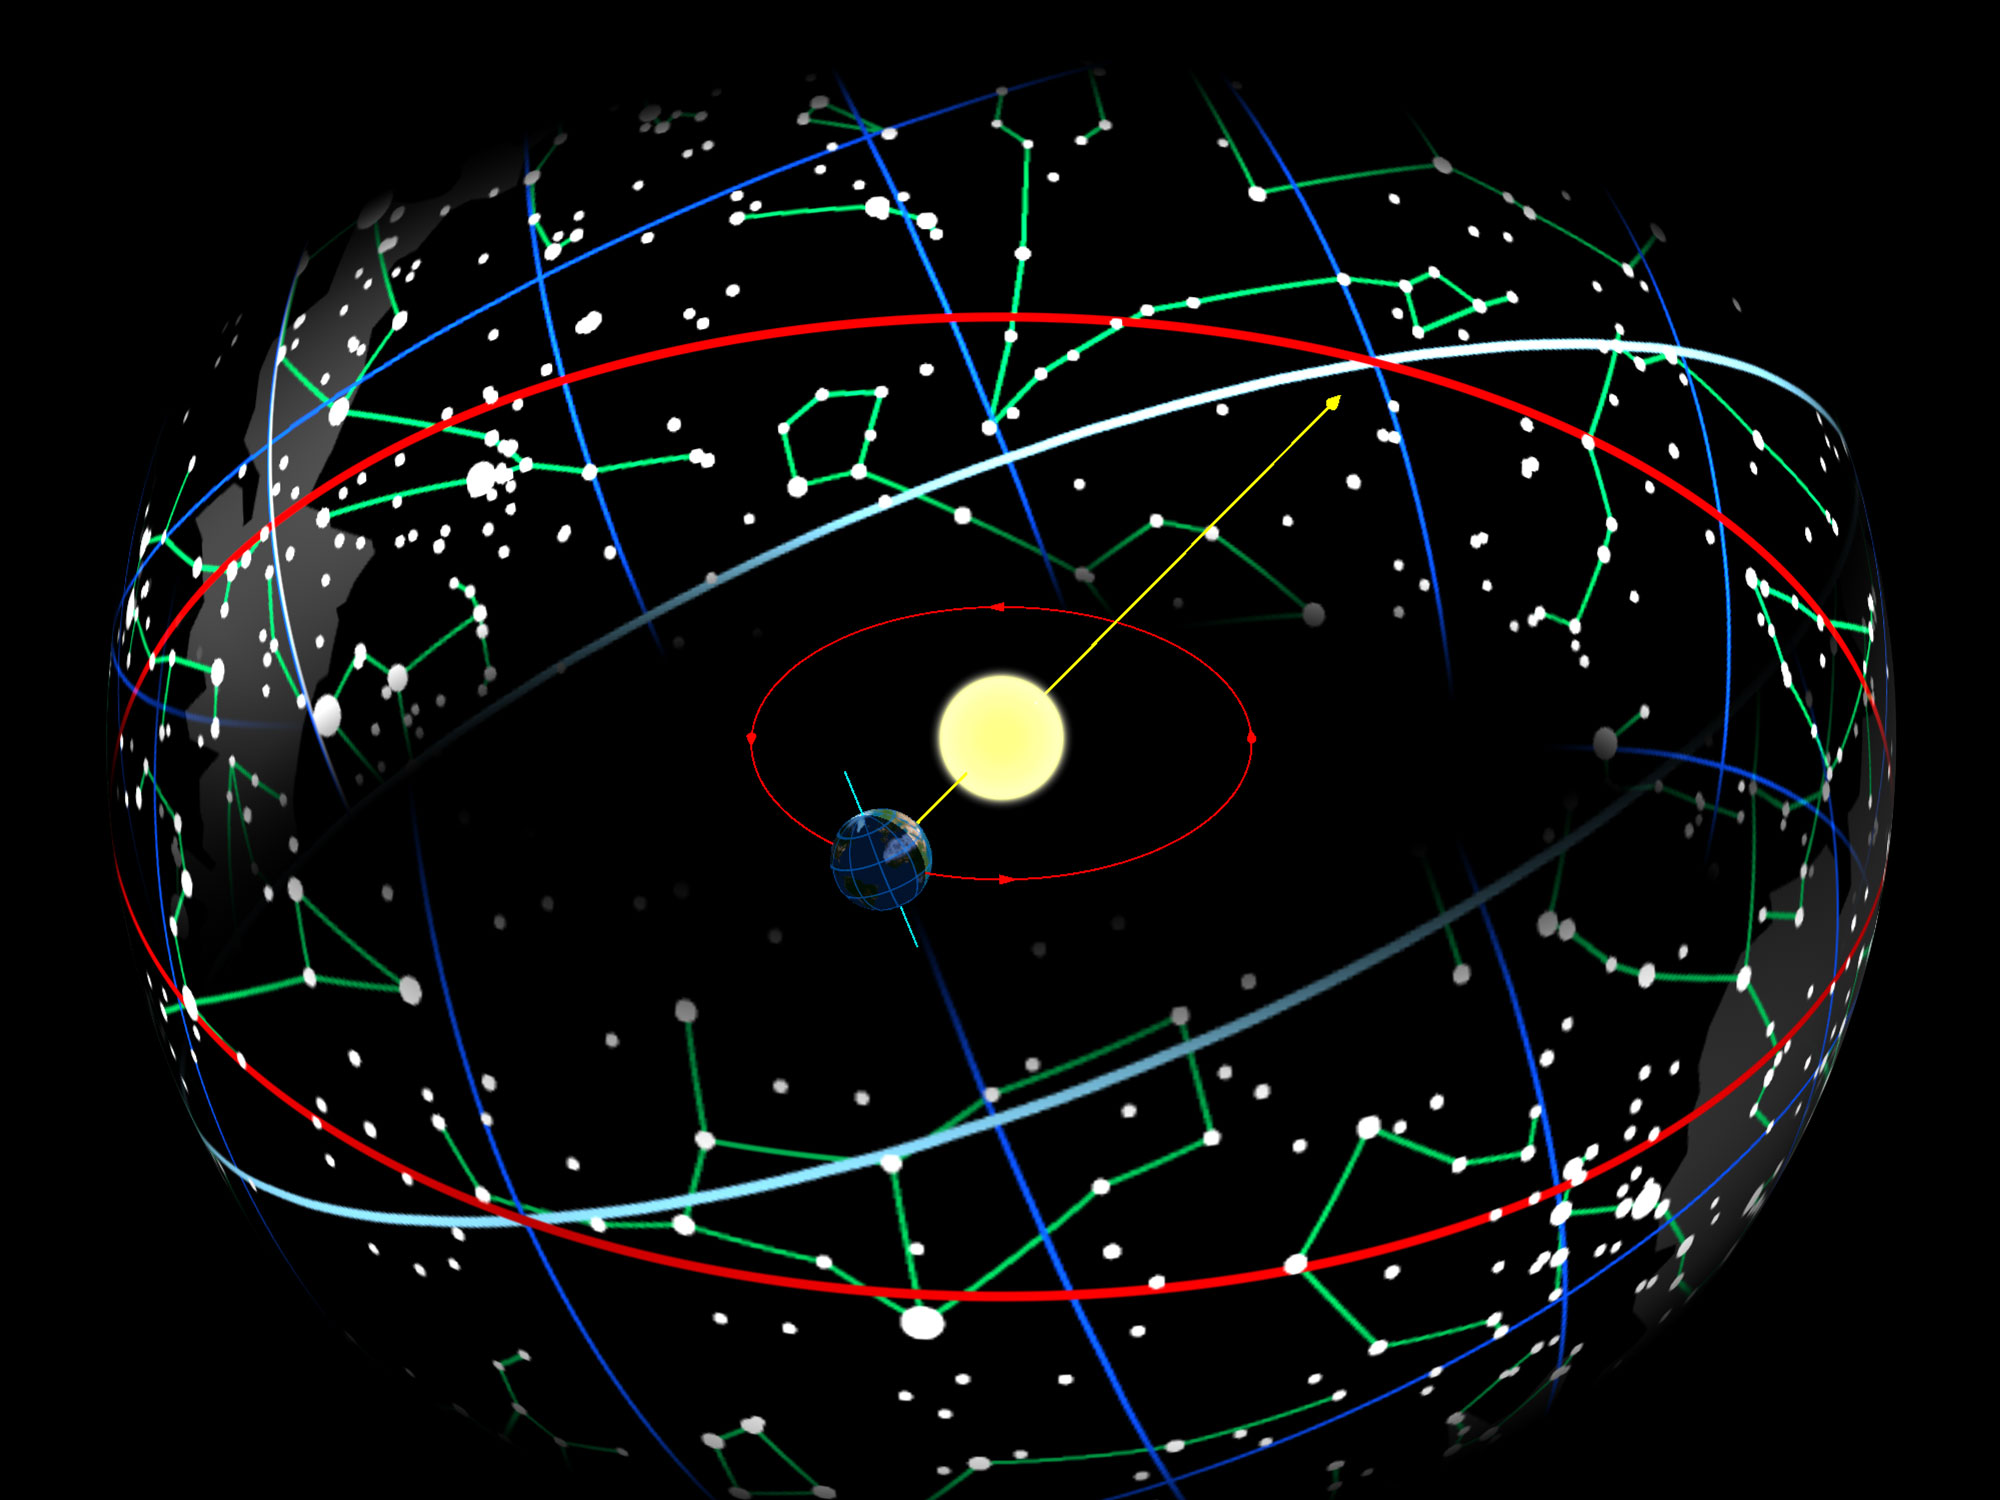 Diagram showing the Earth, sun, the ecliptic, and the projected equator on the constellations.